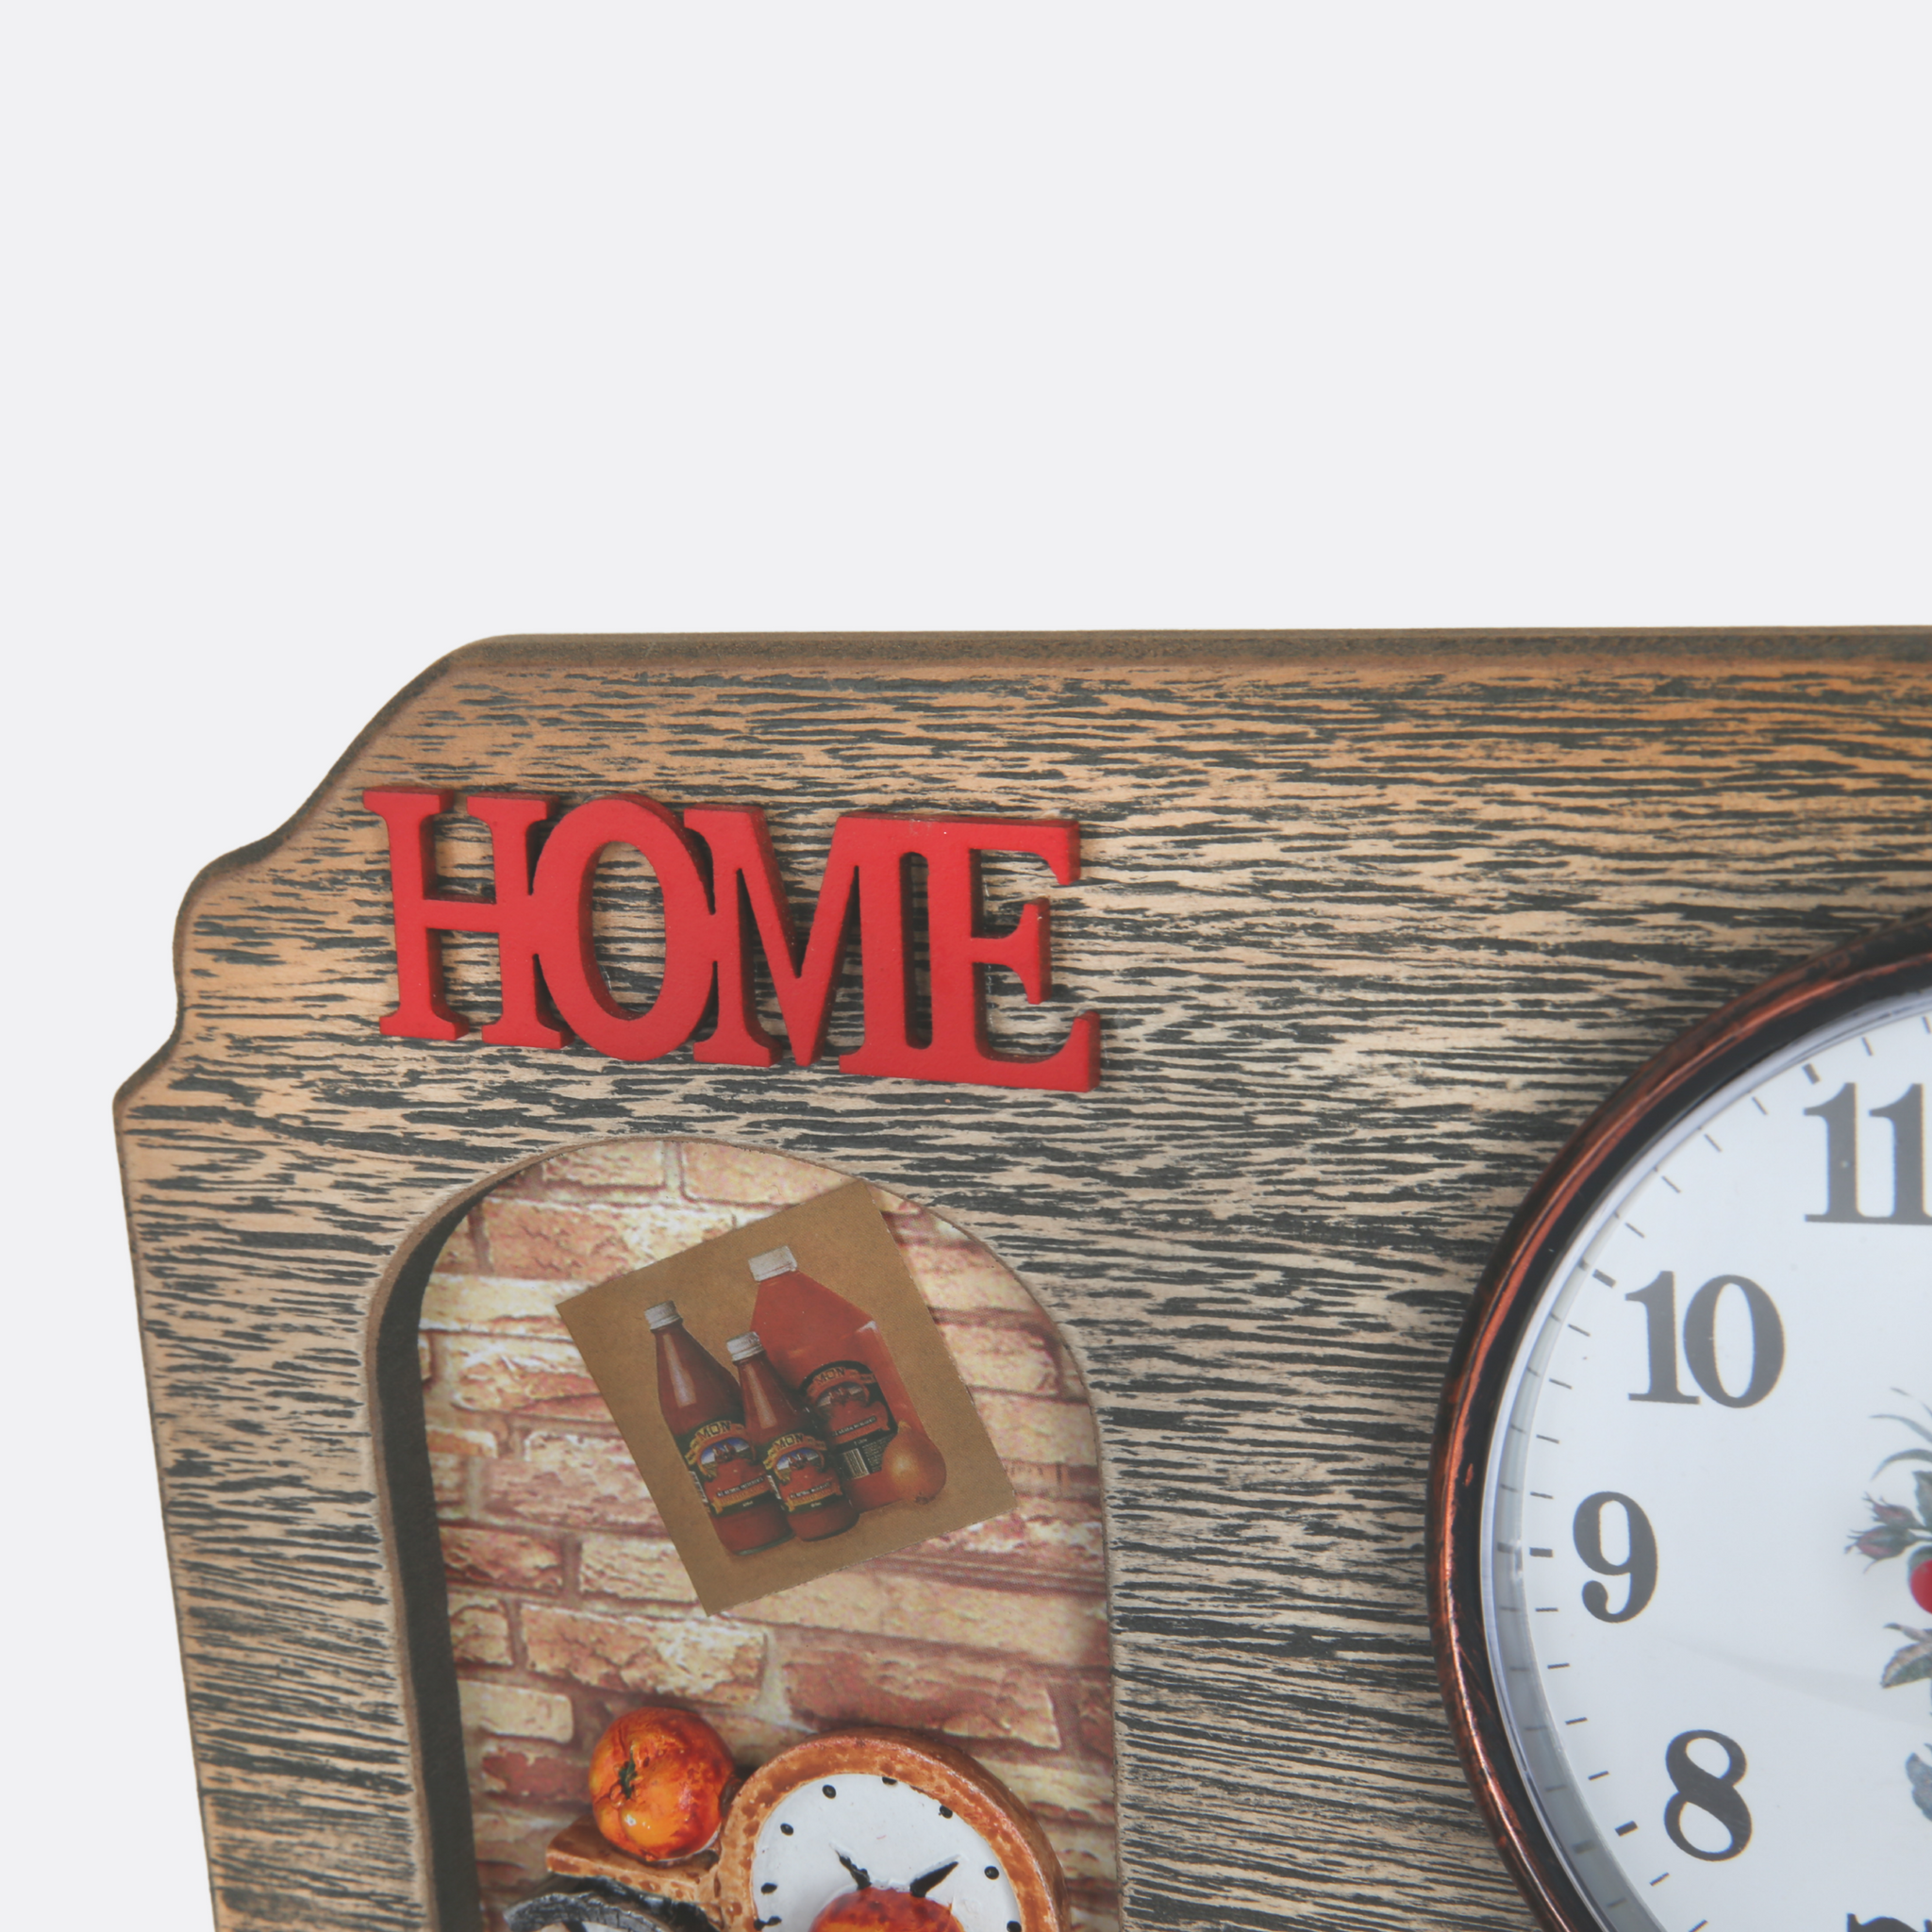 Home Key Holder With Clock